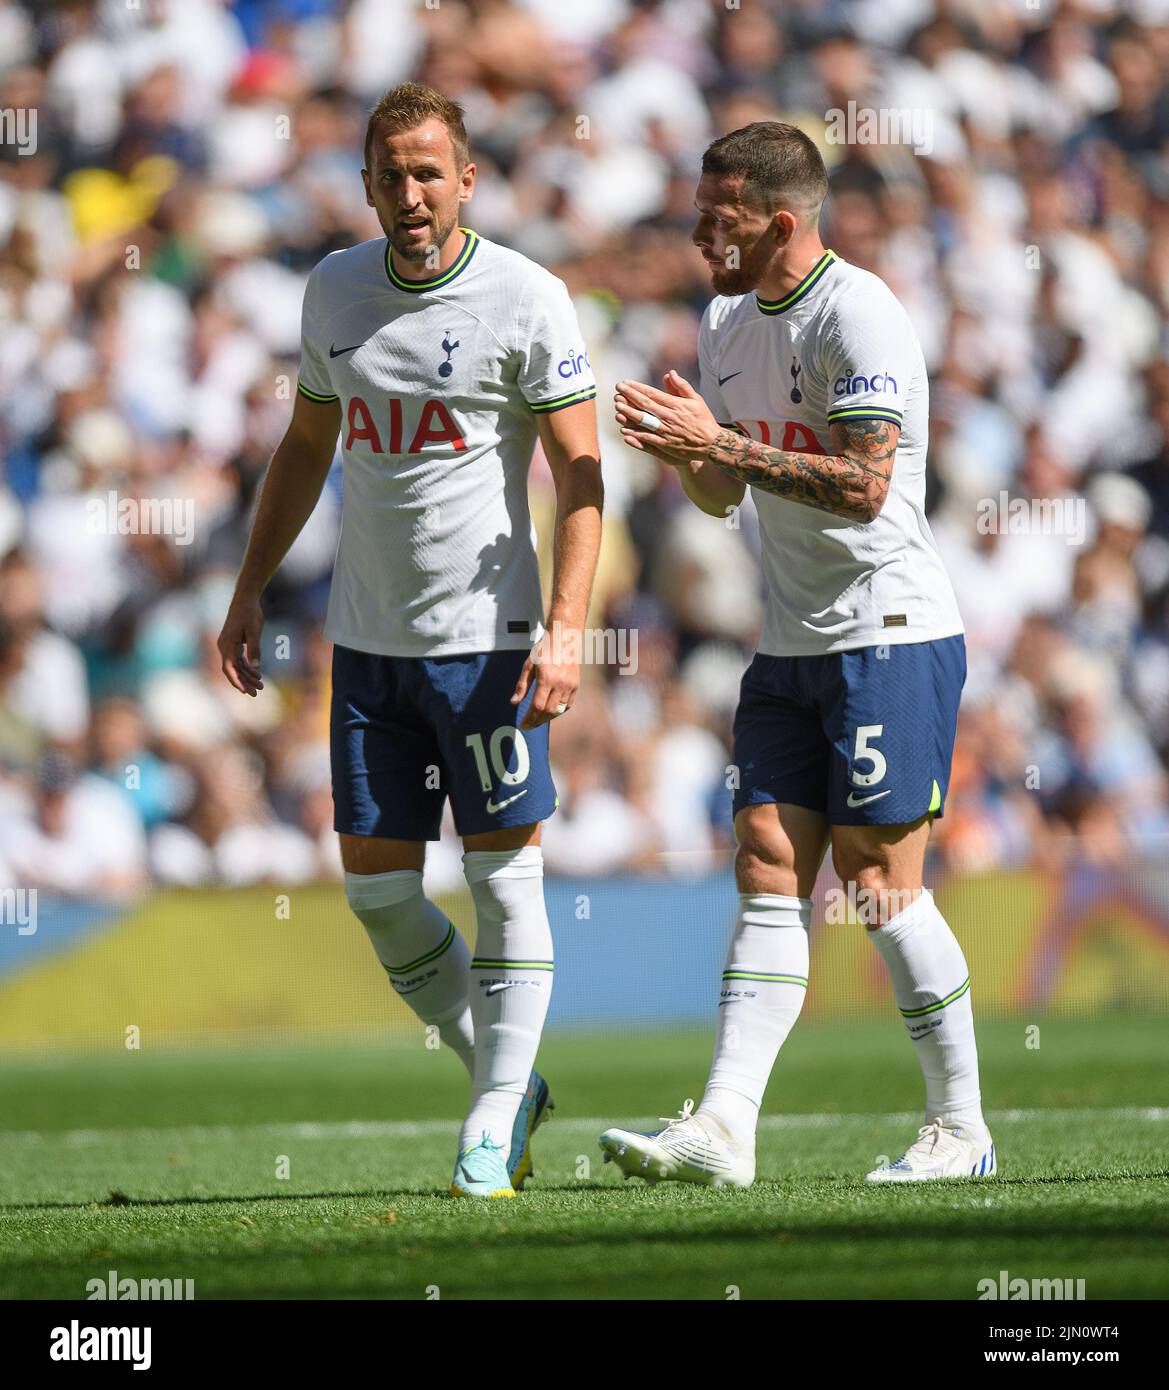 06 Aug 2022 - Tottenham Hotspur v Southampton - Premier League - Tottenham Hotspur Stadium  Tottenham's Harry Kane and Pierre-Emile Hojbjerg during the match against Southampton Picture Credit : © Mark Pain / Alamy Live News Stock Photo